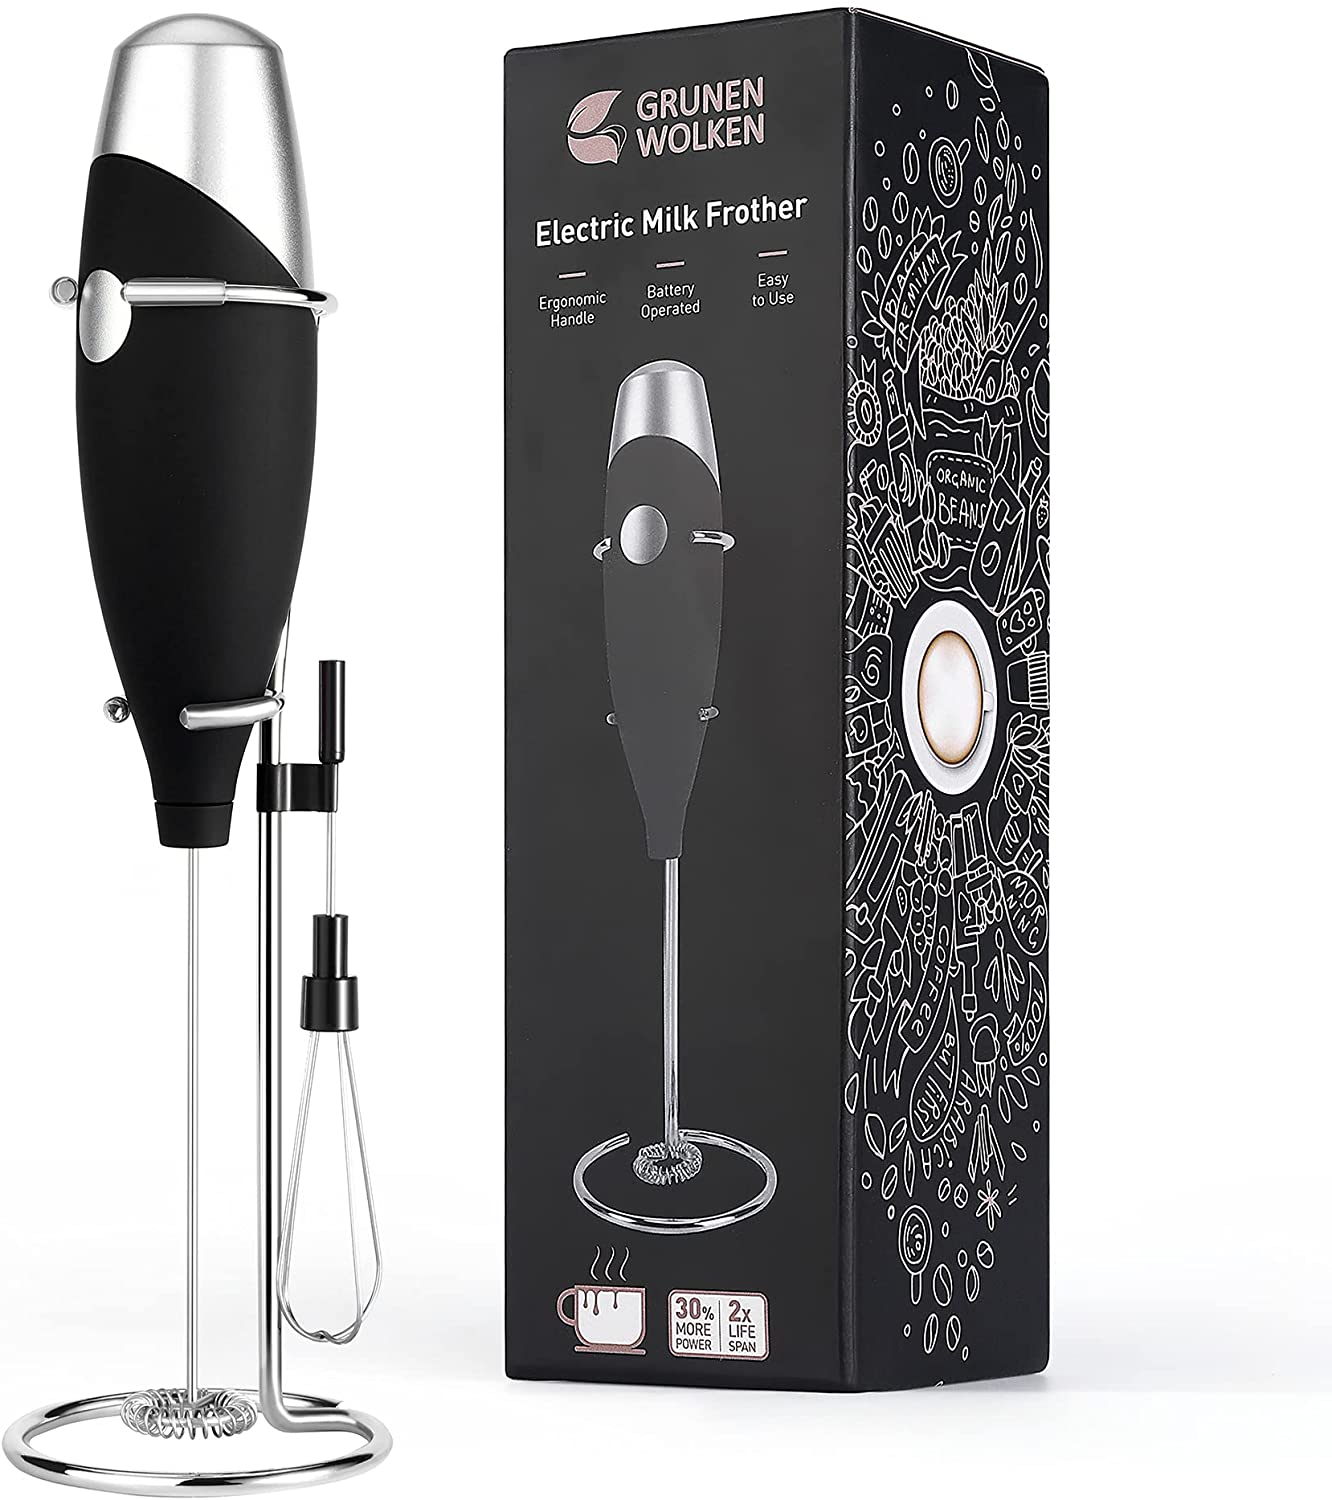 ELITAPRO ULTRA-HIGH-SPEED 19,000 RPM, Milk Frother DOUBLE WHISK, Unique  Detachable EGG BEATER and STAND For quick preparation (Black)